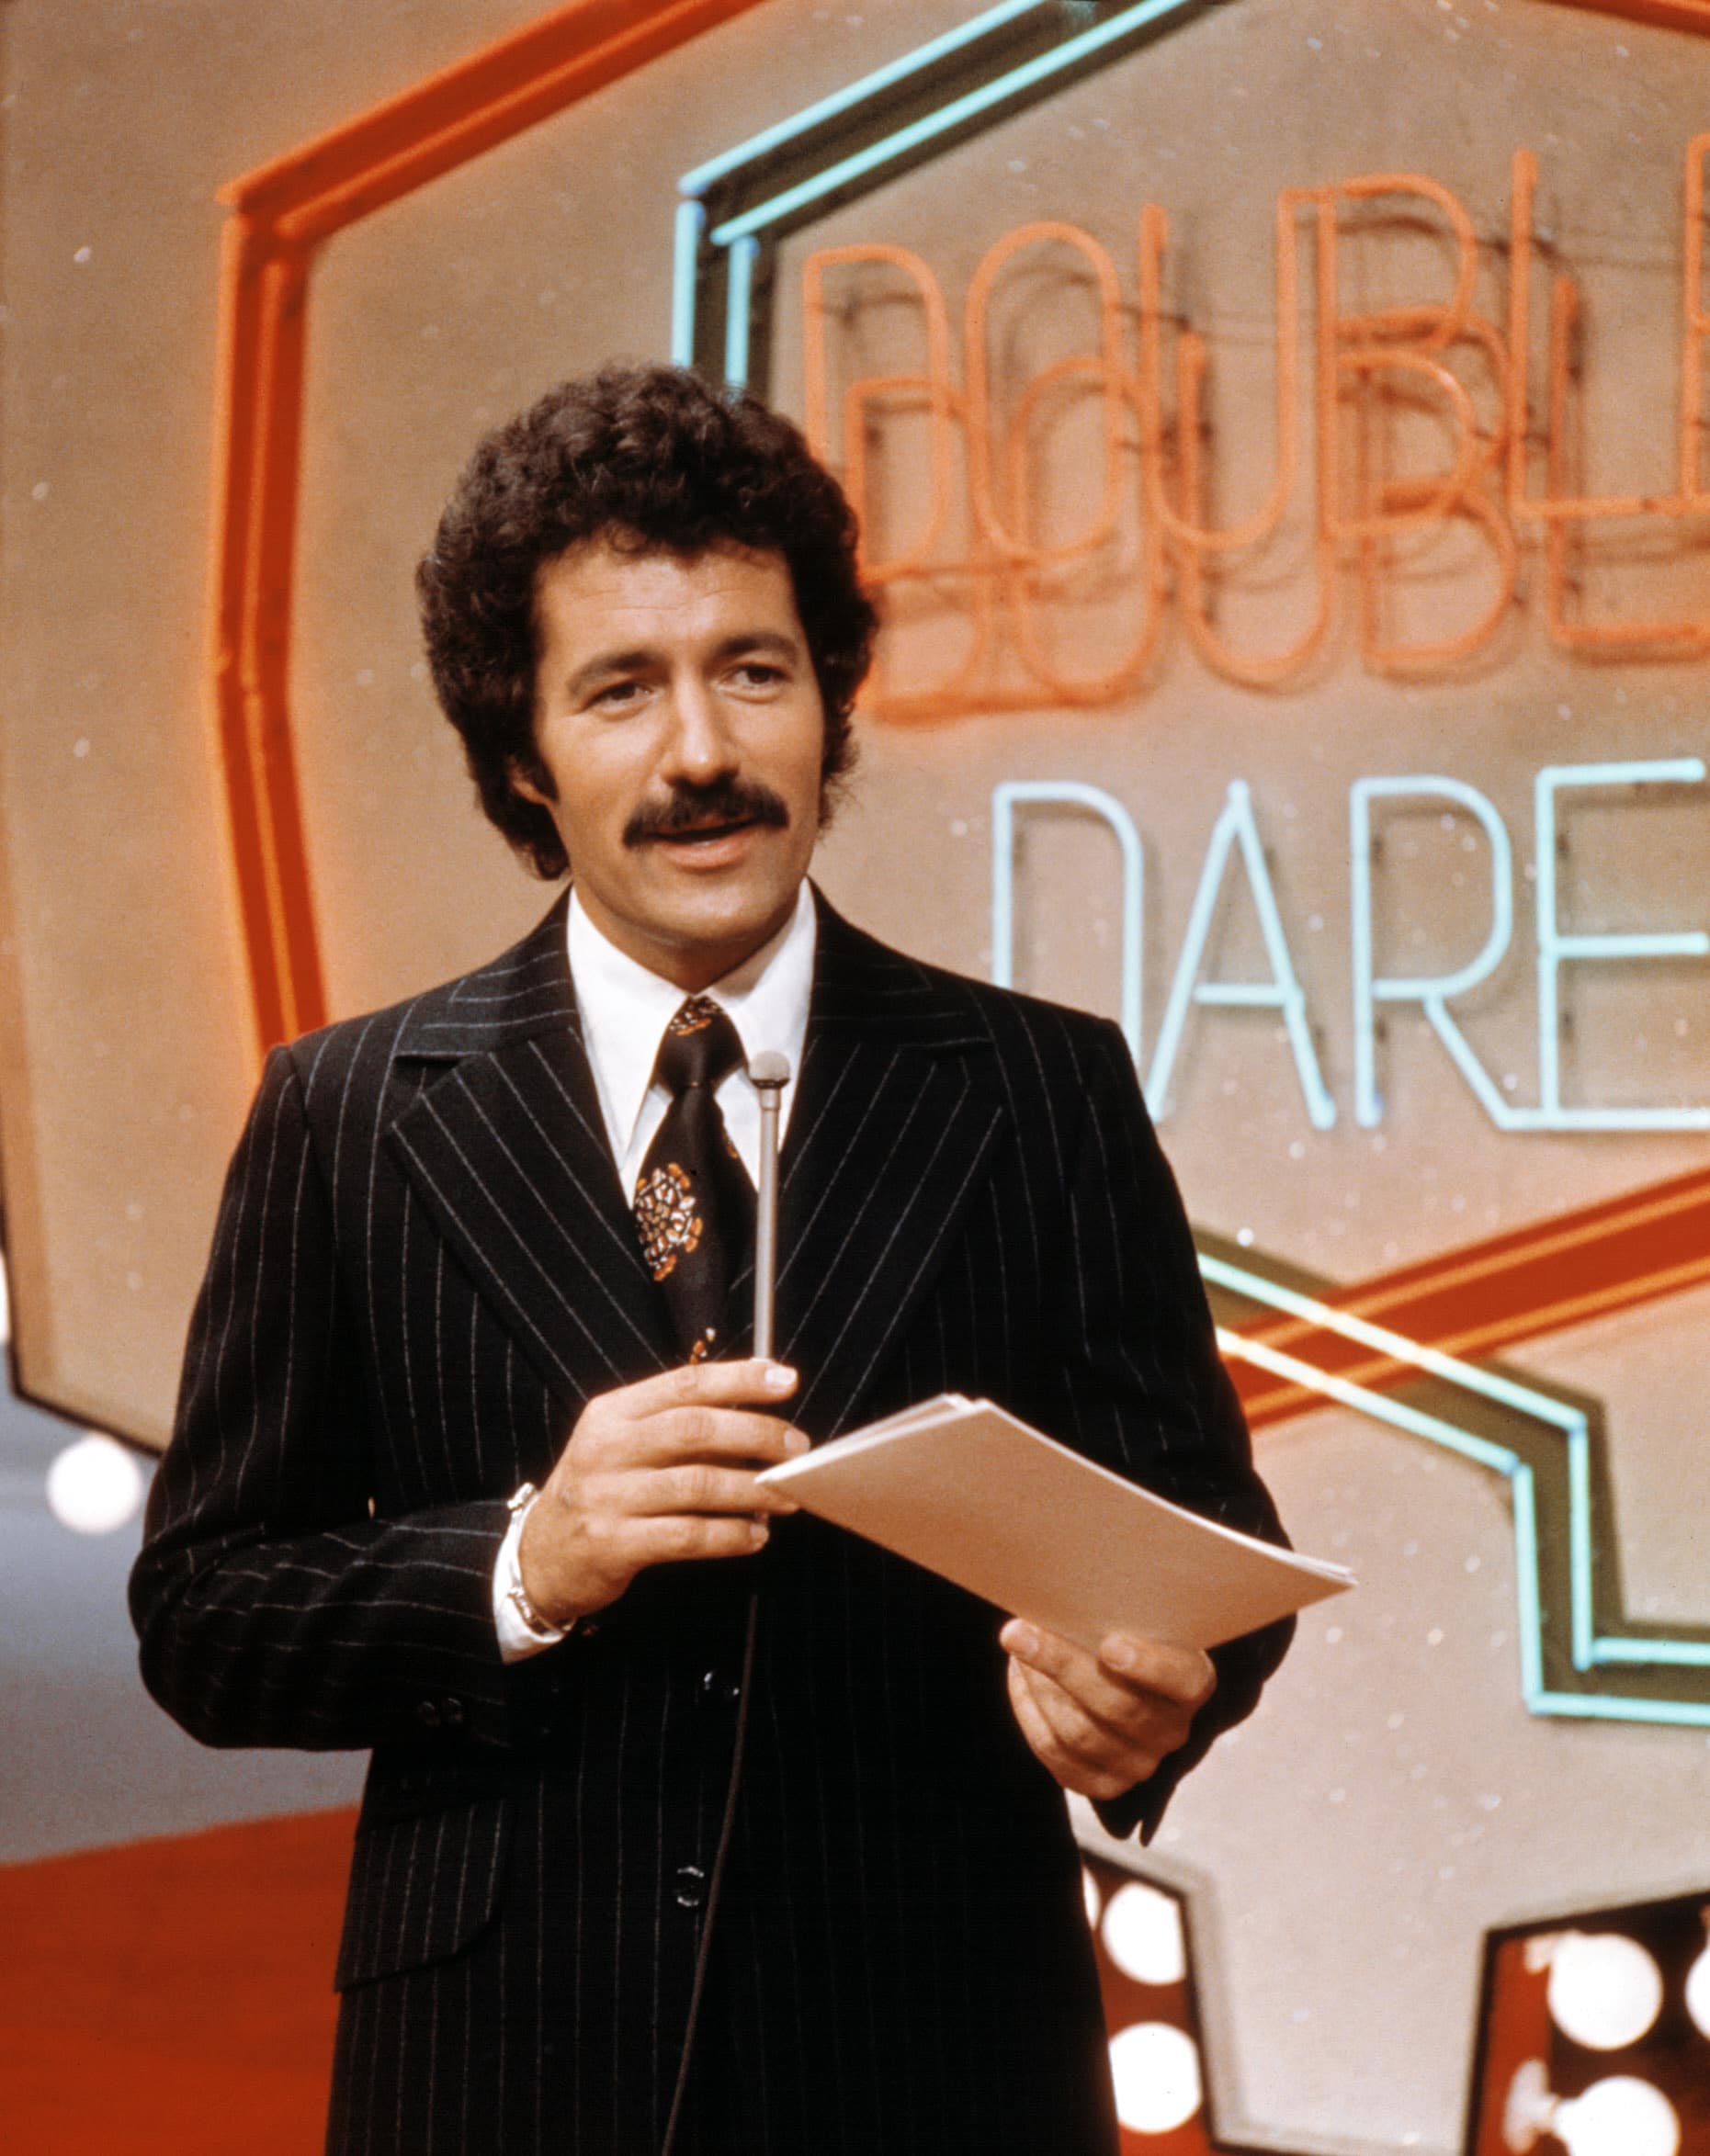 Alex Trebek's Final 'Jeopardy!' Episode Might Include A Special 'Goodbye'